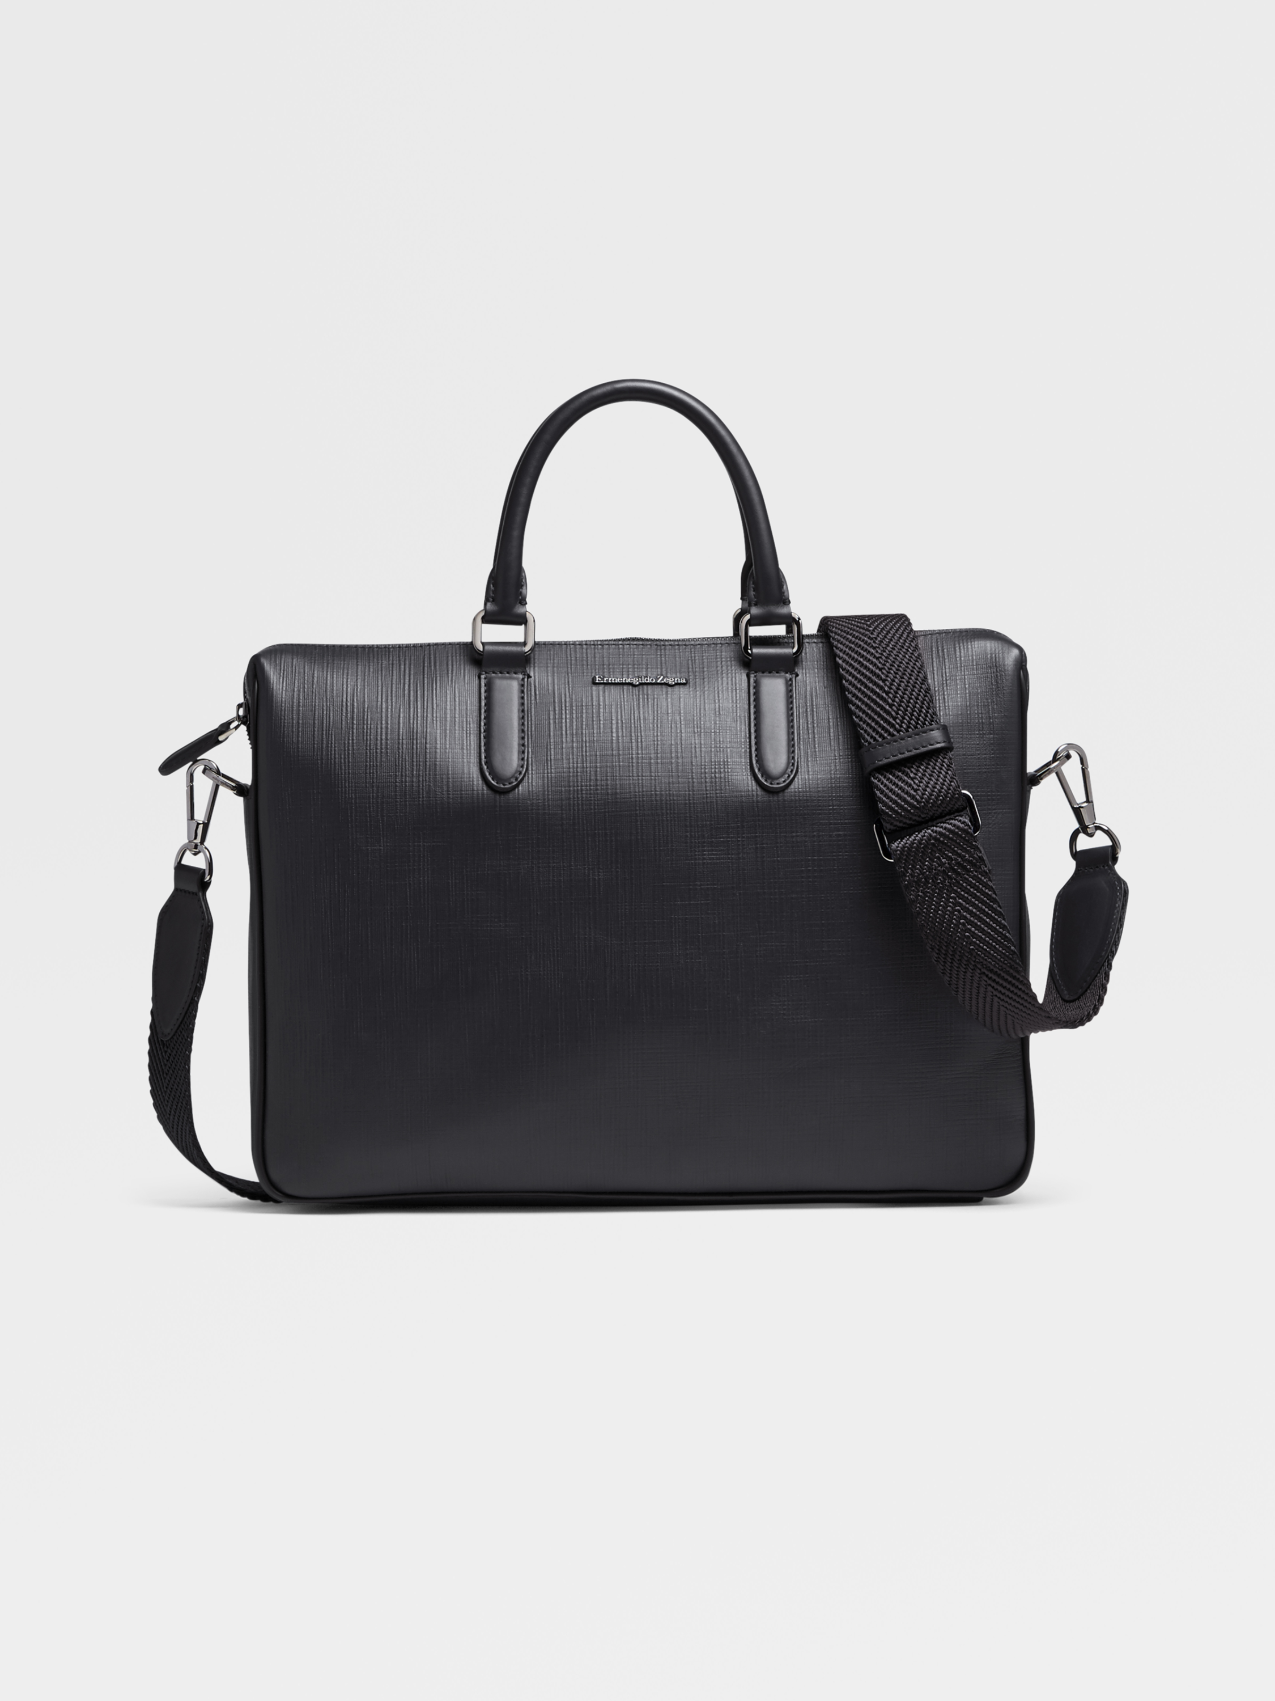 Stuoia Black Leather Business Bag